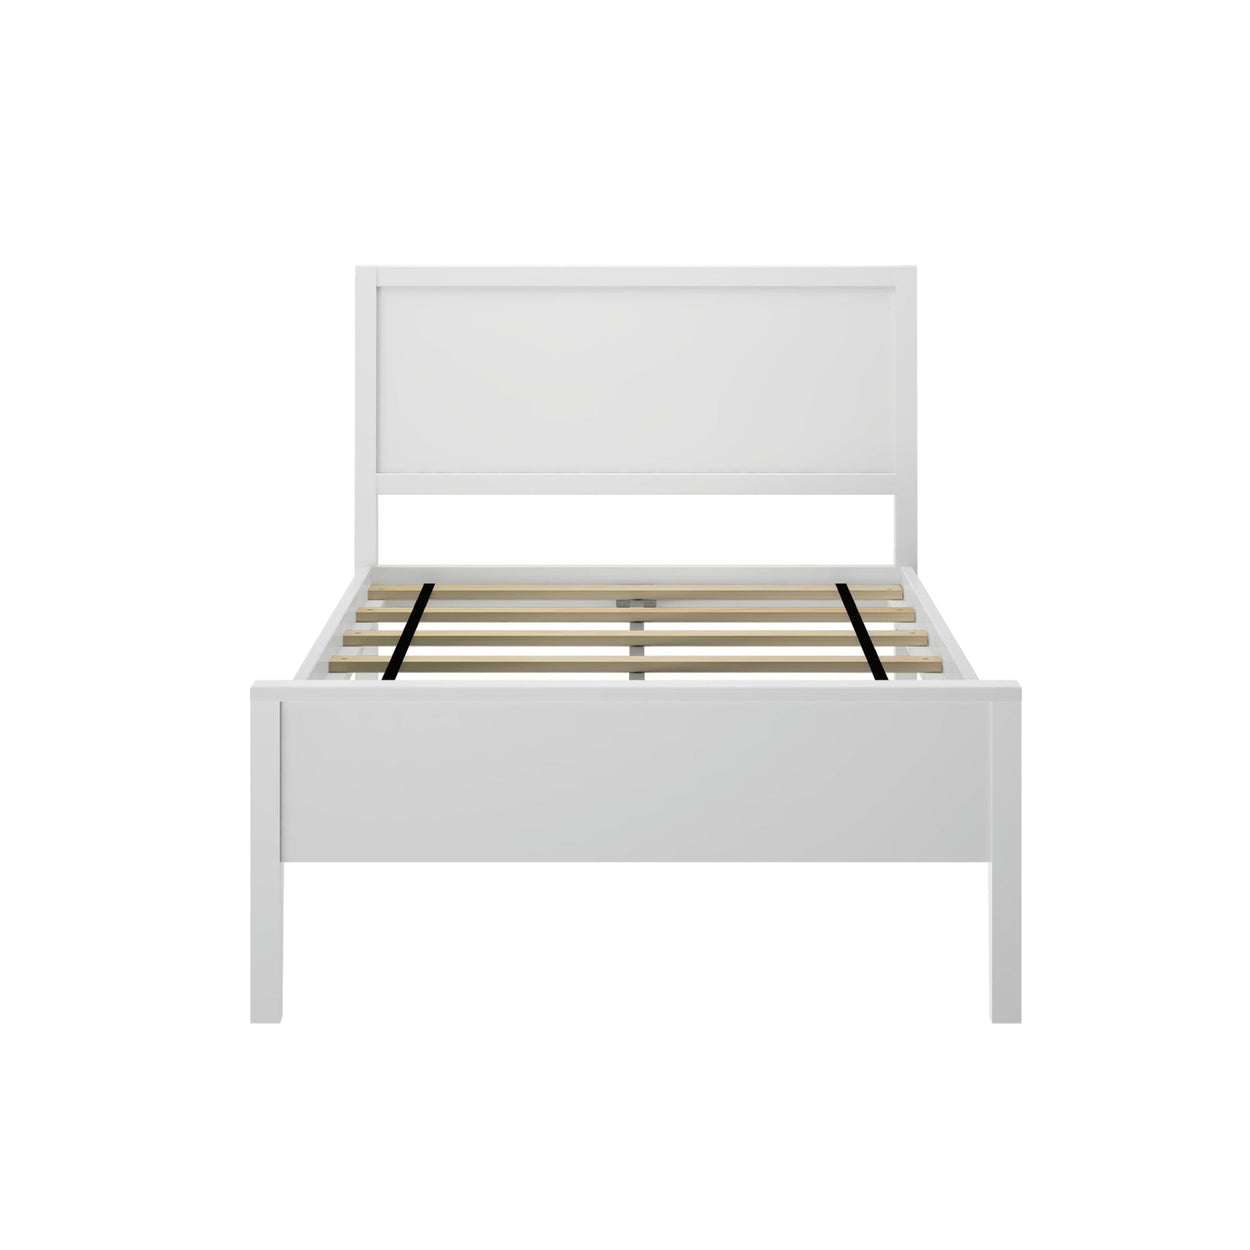 181100-002 : Kids Beds Classic Twin-Size Bed with Panel Headboard, White